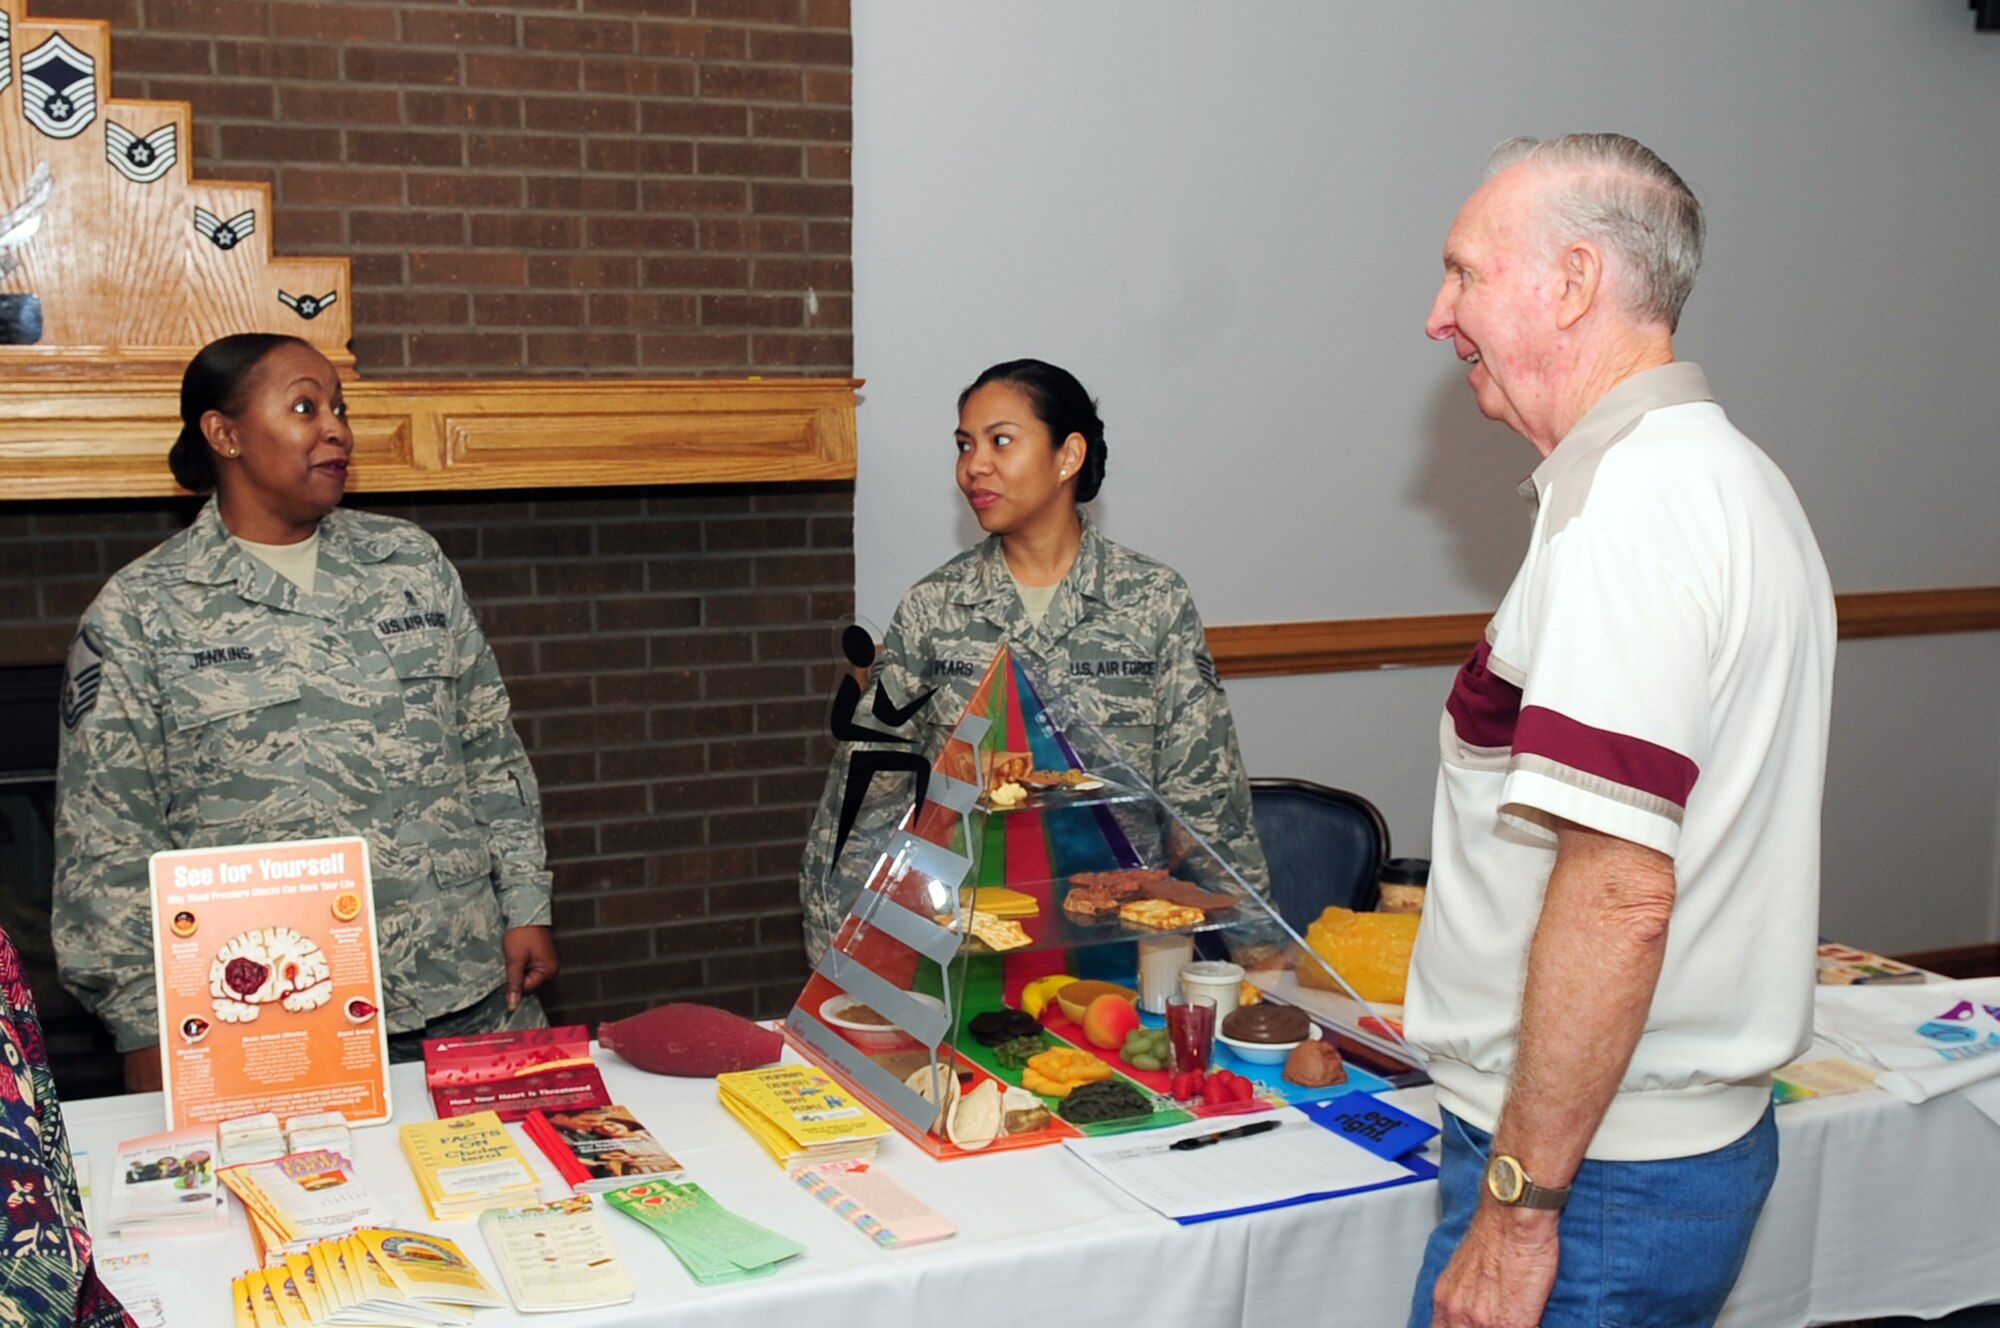 Master Sgt. Tamyara Jenkins and Staff Sgt. Celeste Pears, 4th Aeromedical Dental Squadron, speaks to a retiree about healthy diet and exercise routines during Retiree Appreciation Day at Seymour Johnson Air Force Base, N.C., Sept. 19, 2009. The 4th ADOS also provided cholesterol tests and had physical therapy Airmen on hand to ensure retirees were aware of services offered at the clinic. (U.S. Air Force photo/Airman 1st Class Rae Perry)